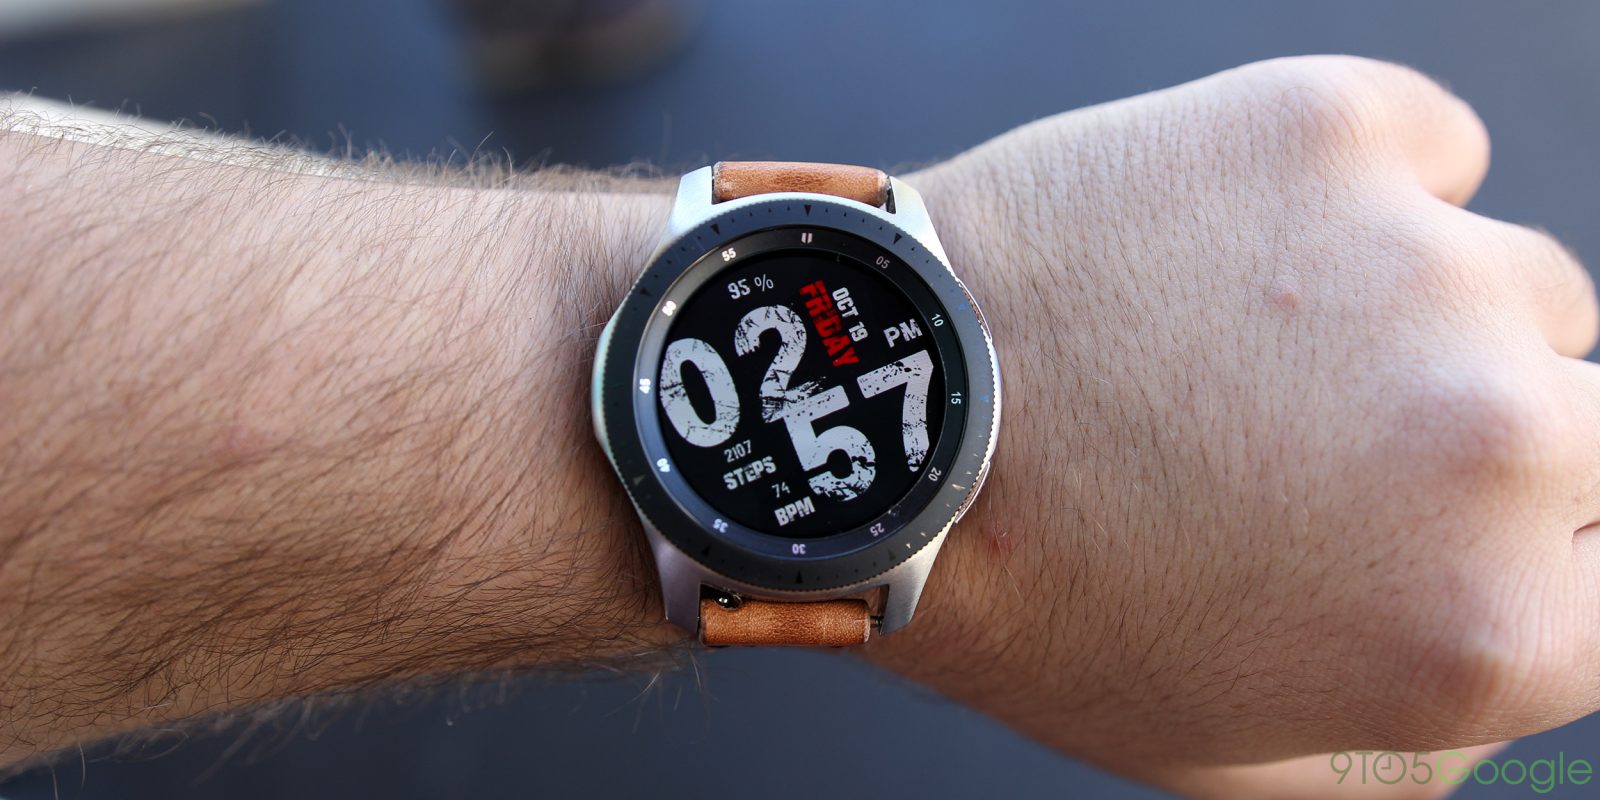 Review: The Samsung Galaxy Watch is the Android smartwatch king of the ...